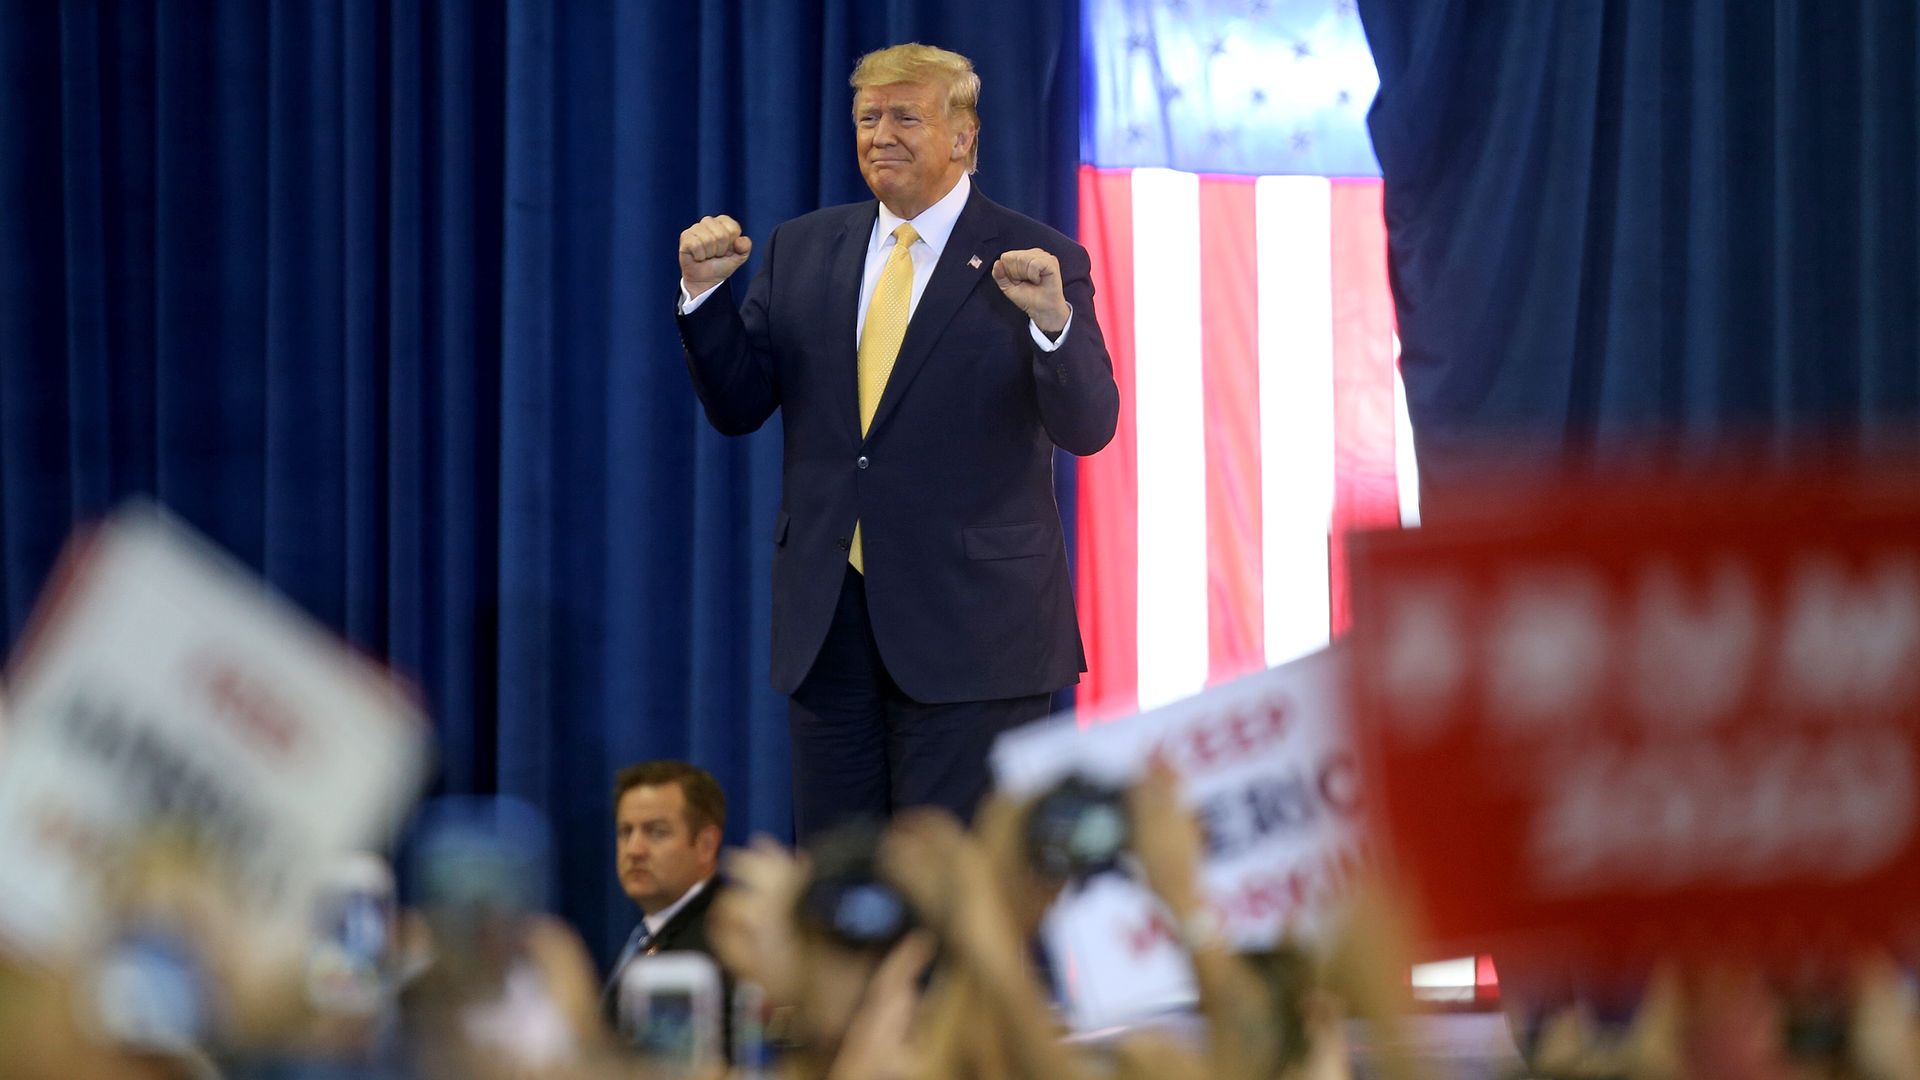  President Donald Trump speaks during a campaign rally at Sudduth Coliseum on October 11, 2019 in Lake Charles, Louisiana.